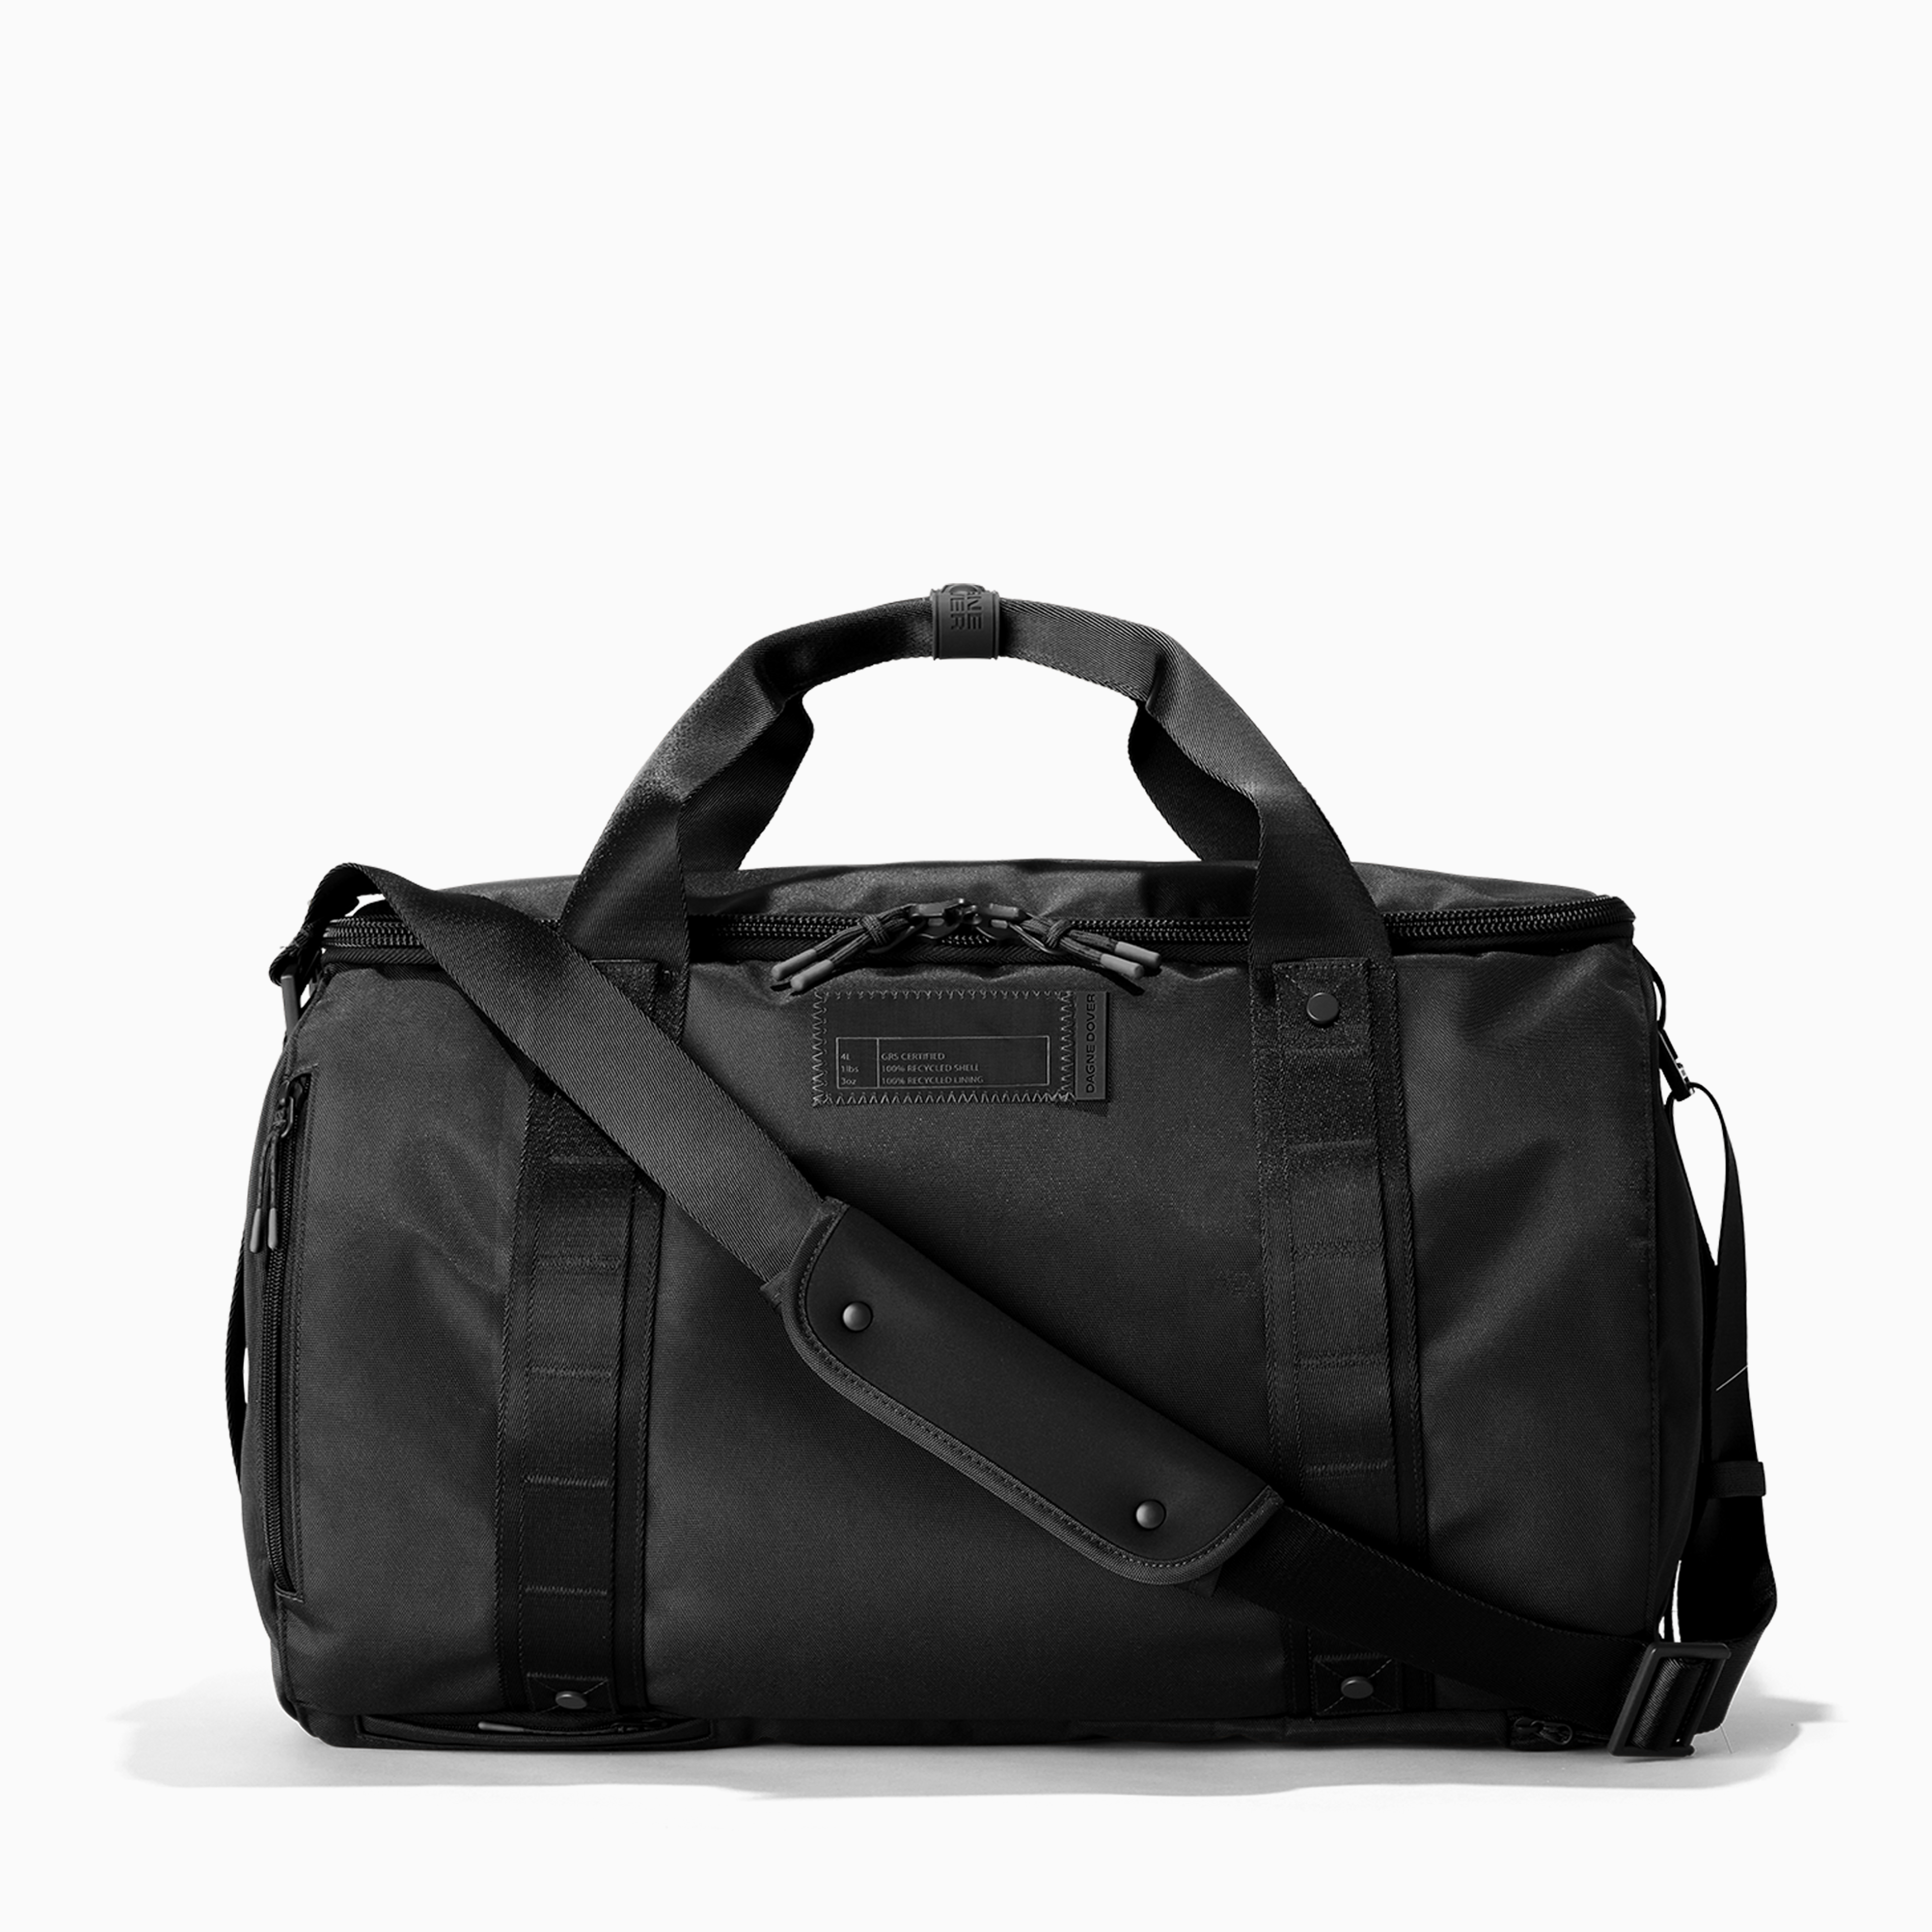 Lagos Convertible Duffle in Onyx, Large